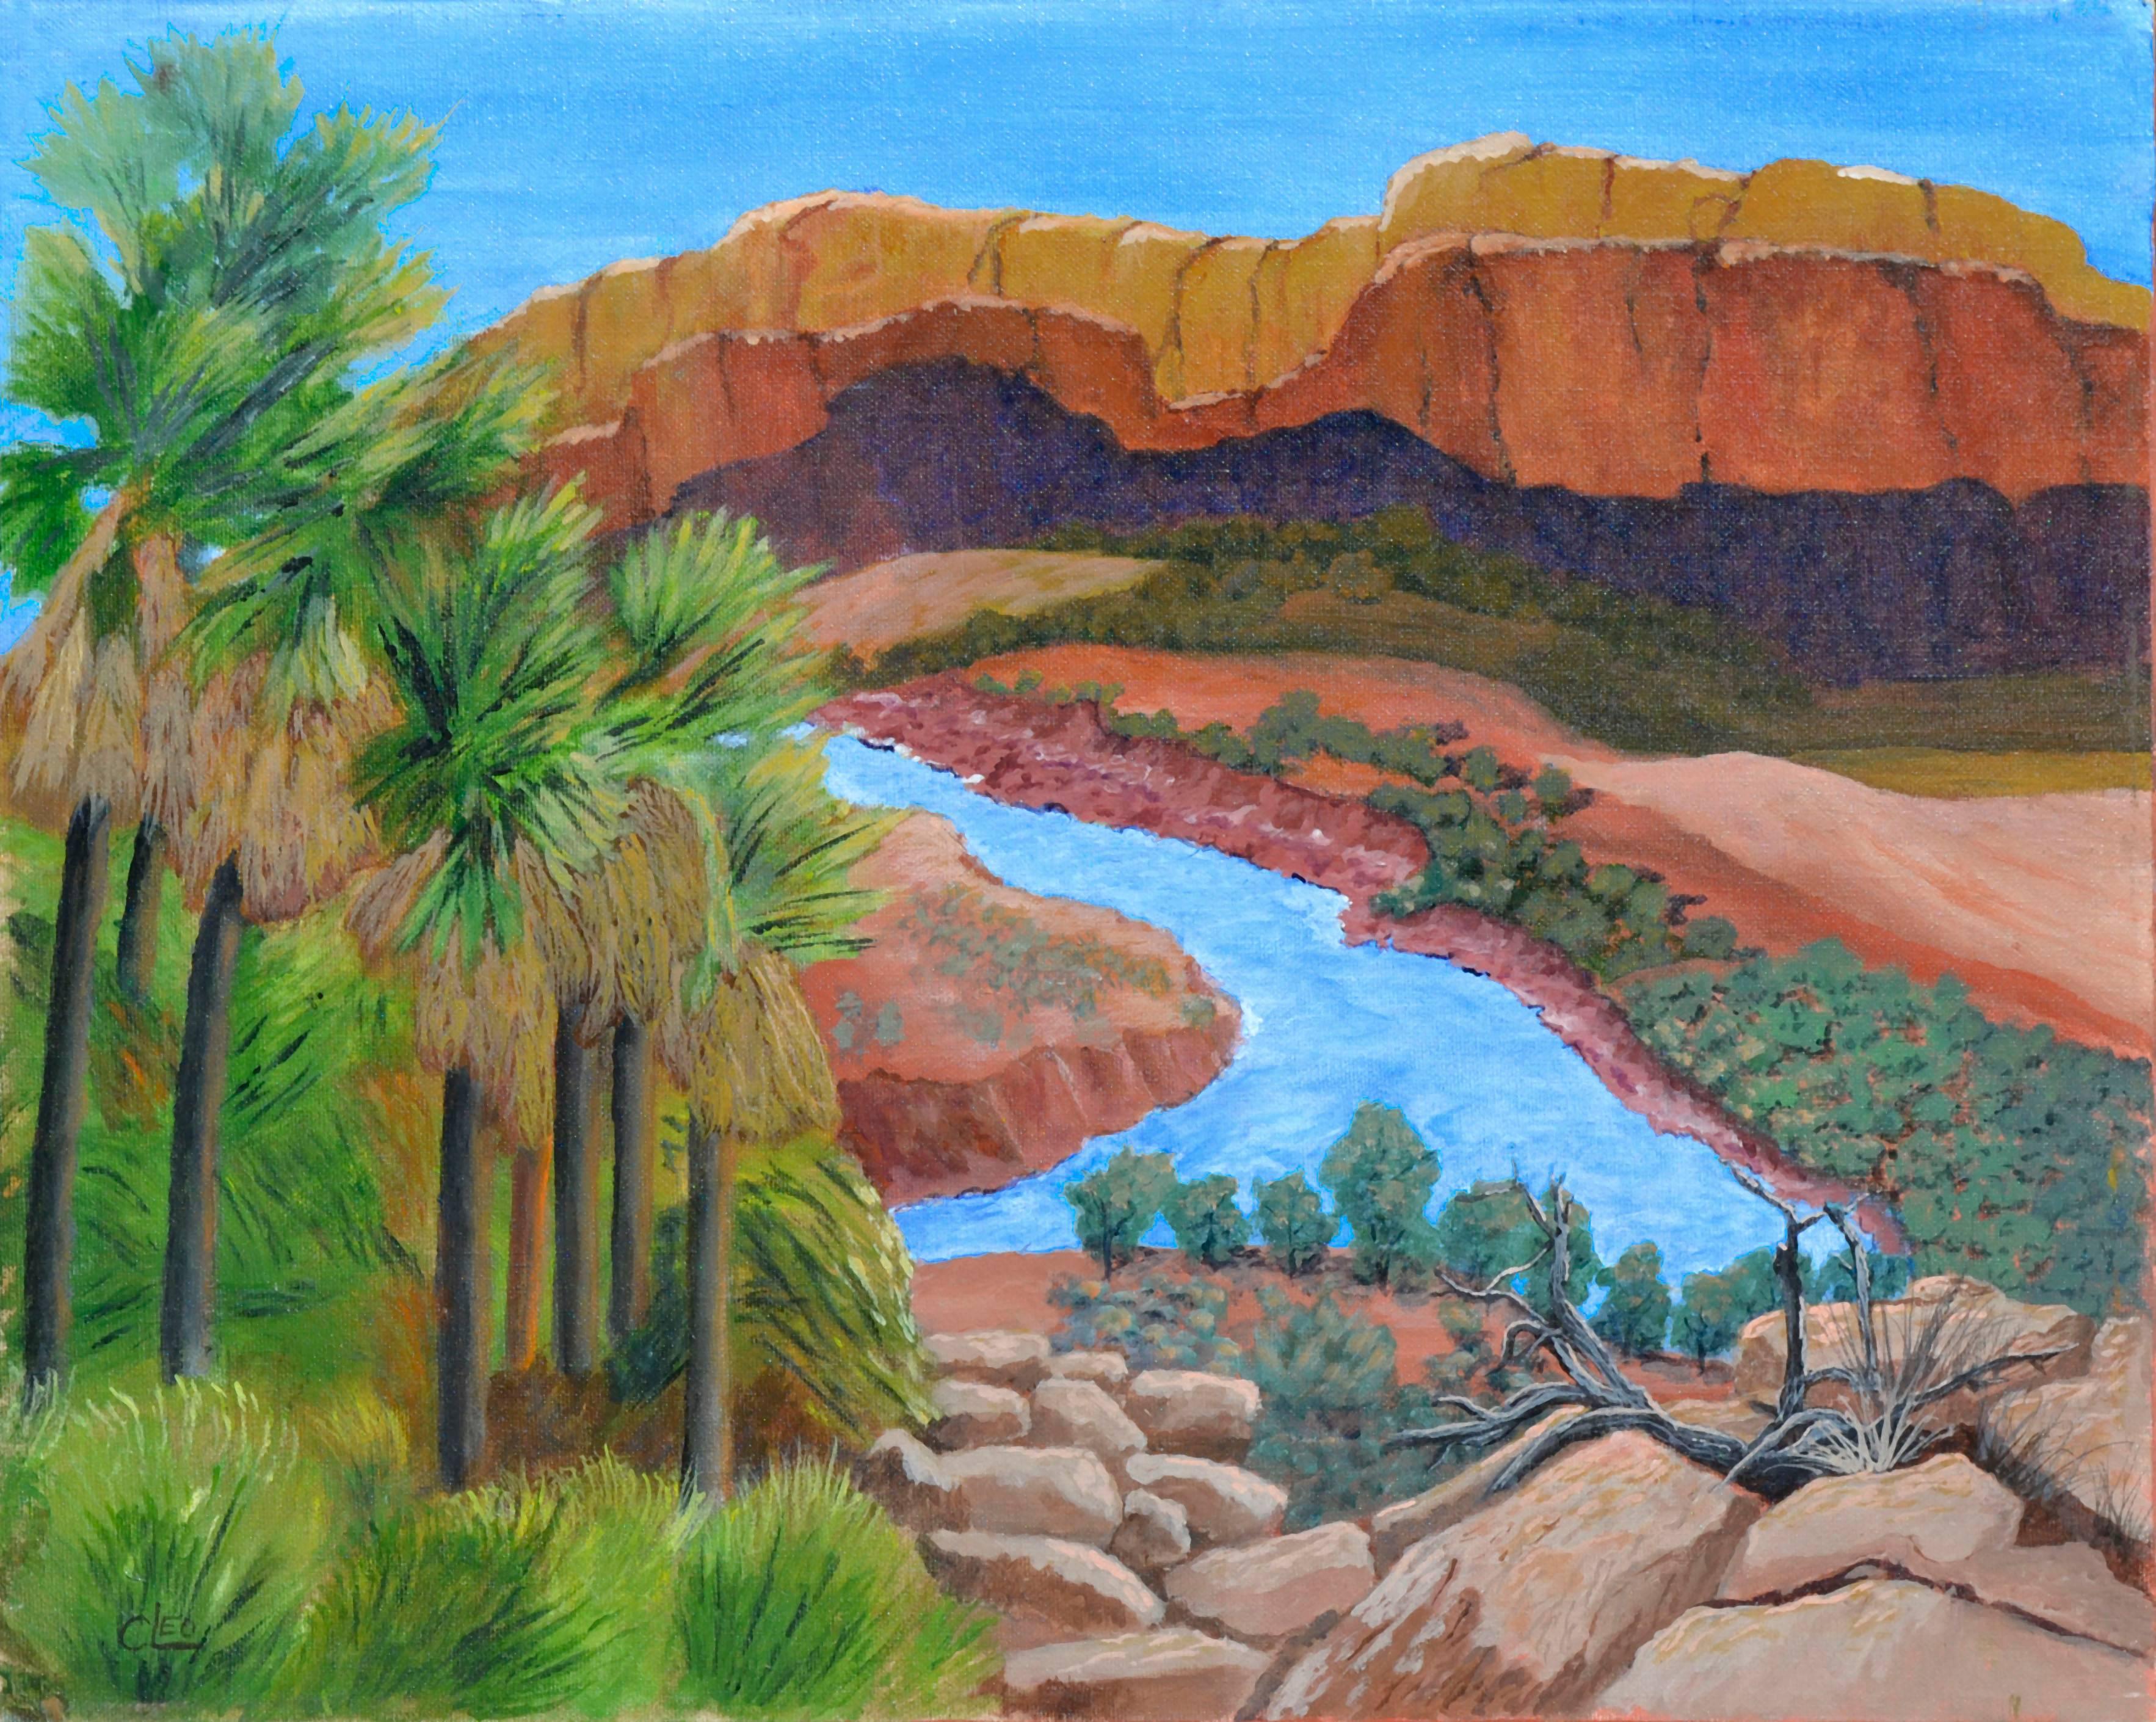 Canyon and River - Desert Landscape 